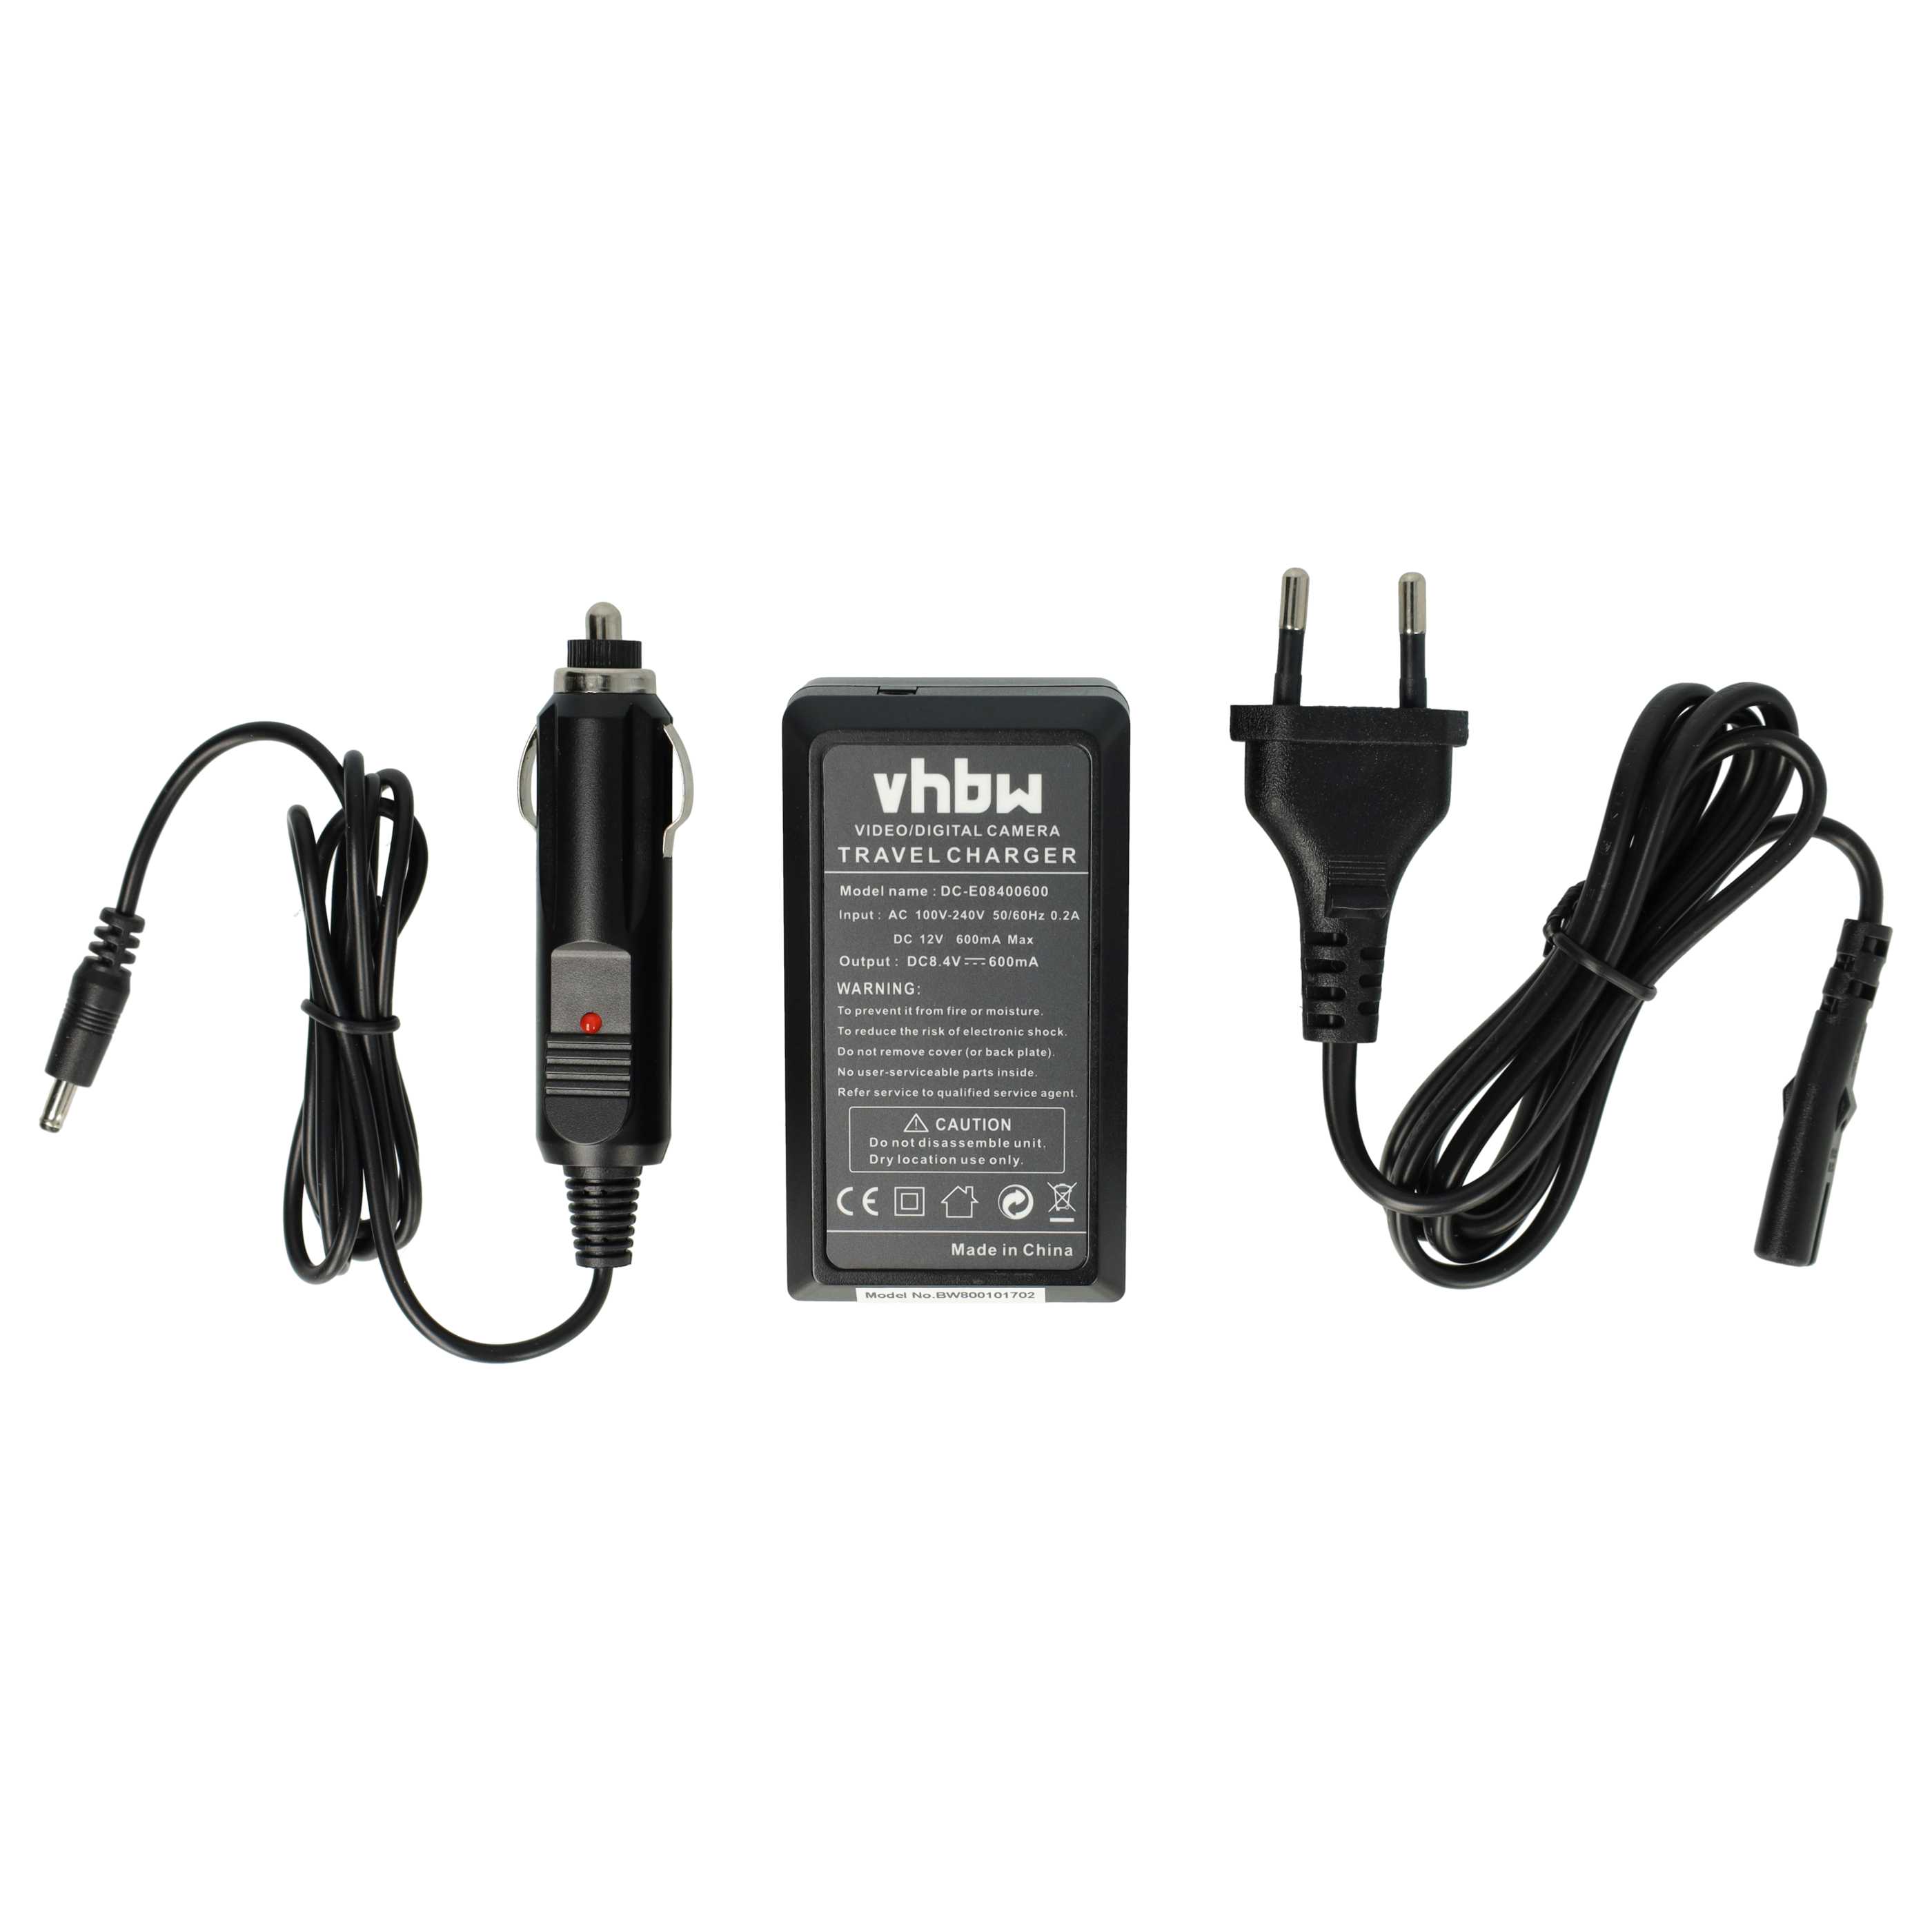 Battery Charger suitable for Canon LP-E8 Camera etc. - 0.6 A, 8.4 V